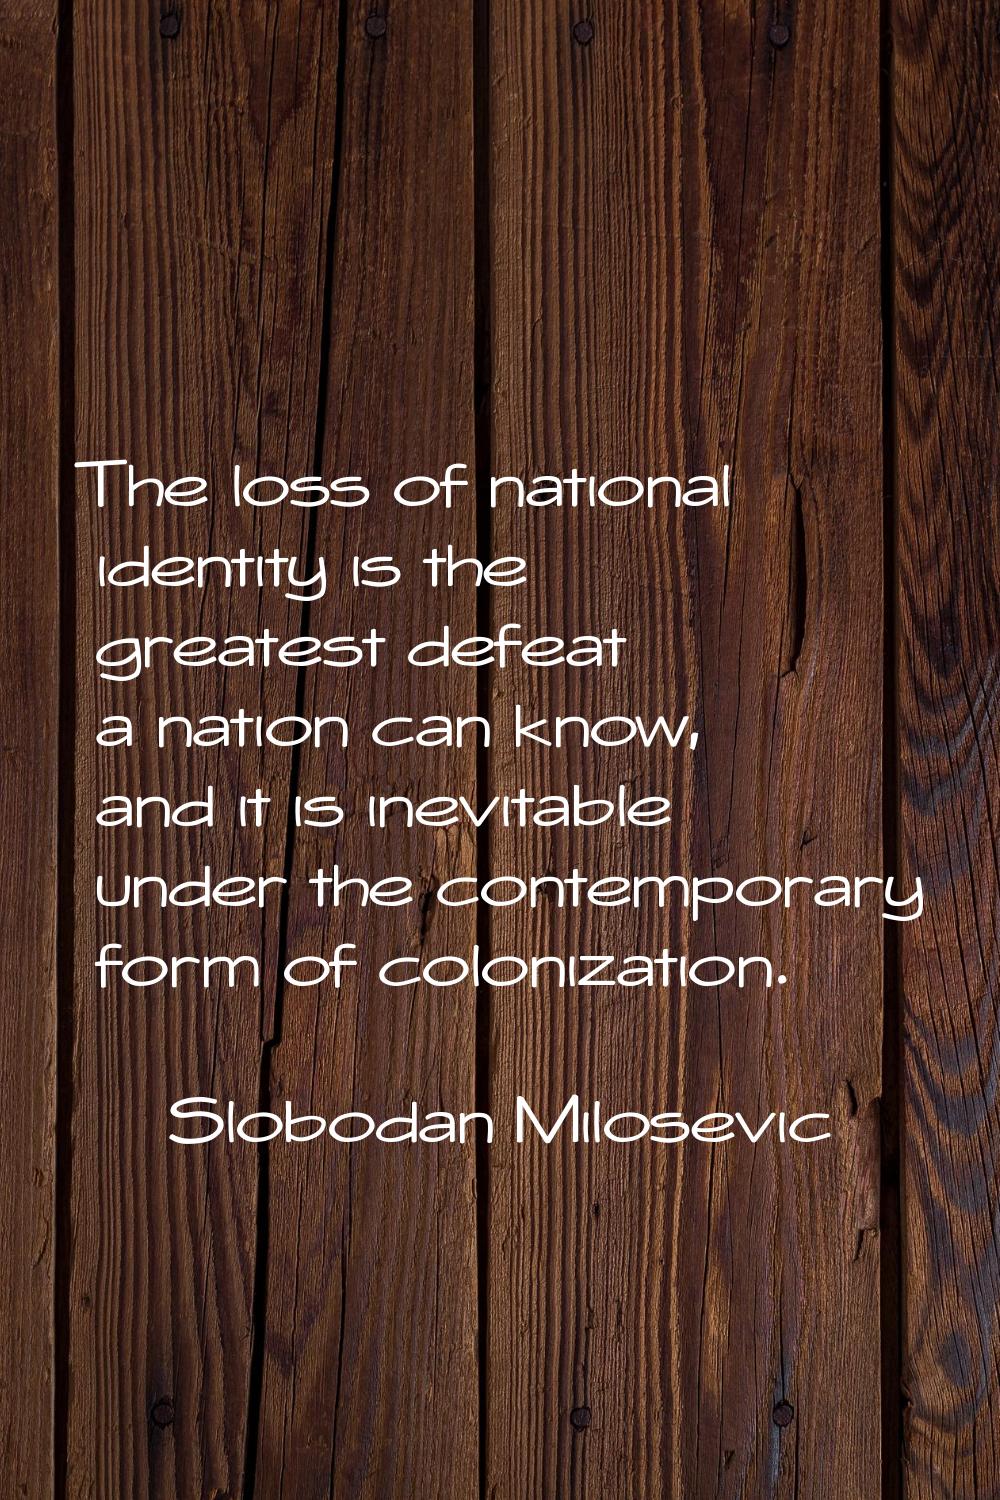 The loss of national identity is the greatest defeat a nation can know, and it is inevitable under 